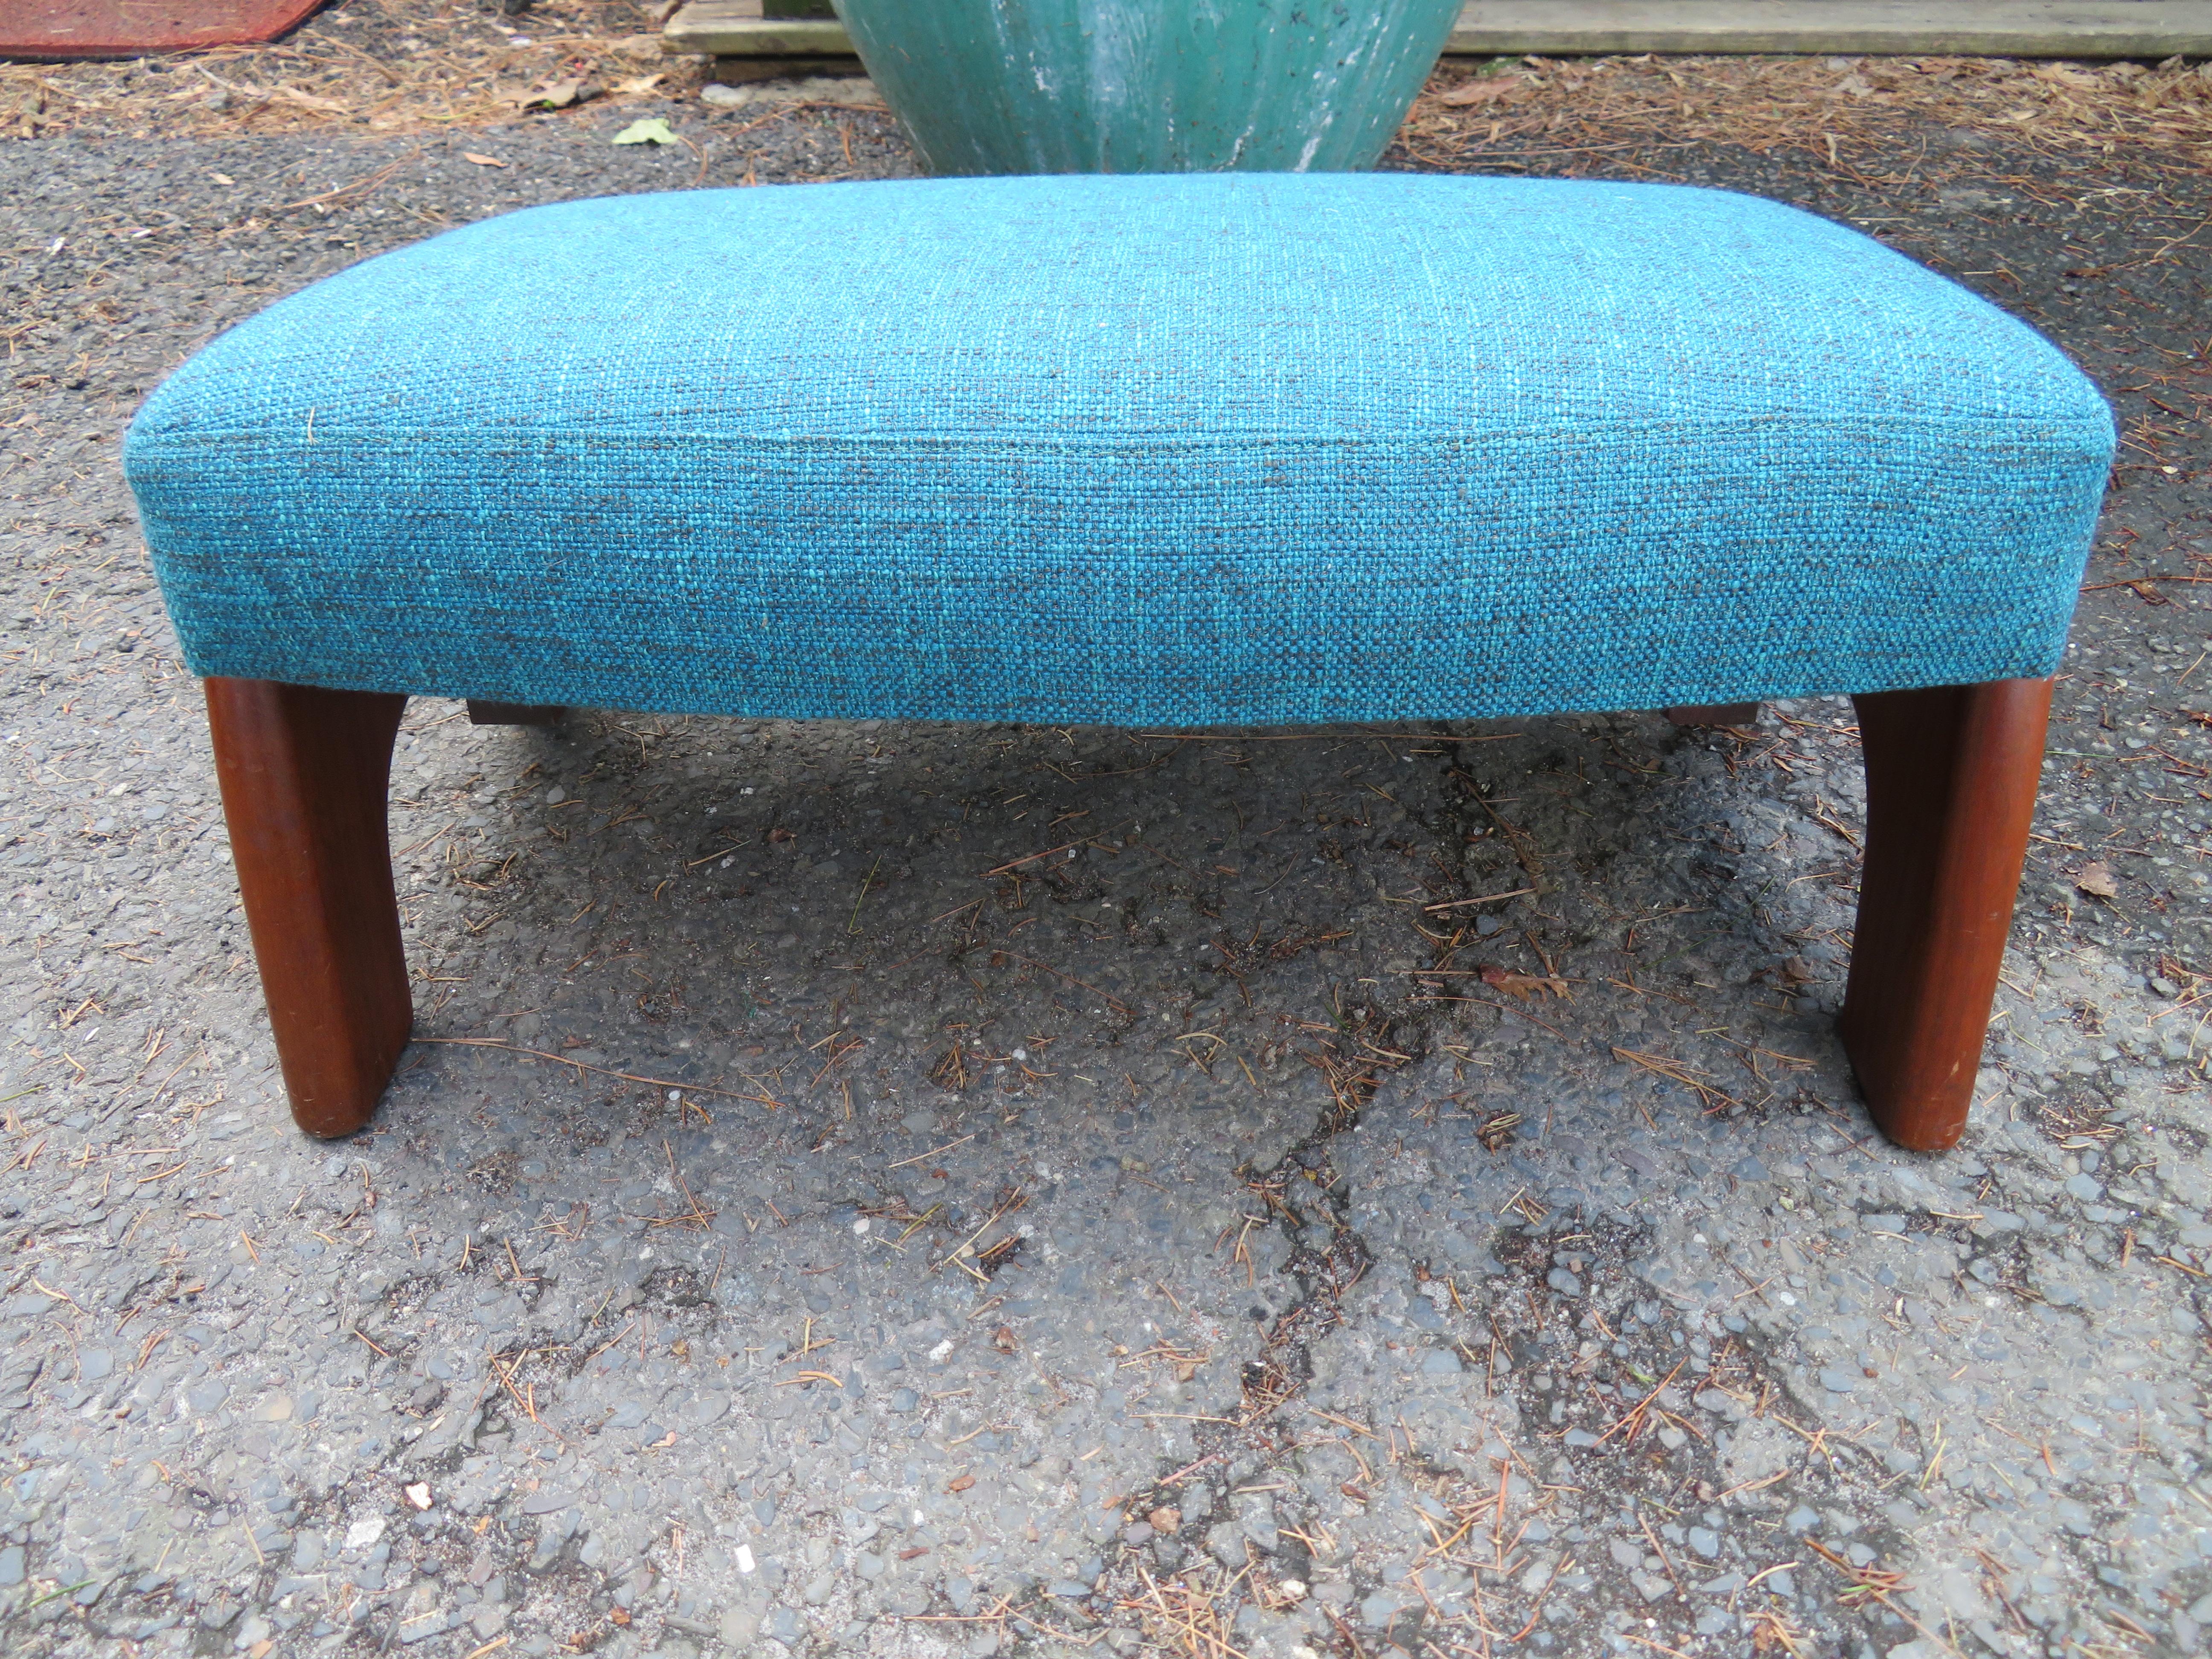 Wonderful Adrian Pearsall ottoman for the crescent lounge chair. This piece was made to use with the crescent chaise lounge but can be used with any chair really. It has a slightly curved front that fits nicely with the concave end of chaise lounge